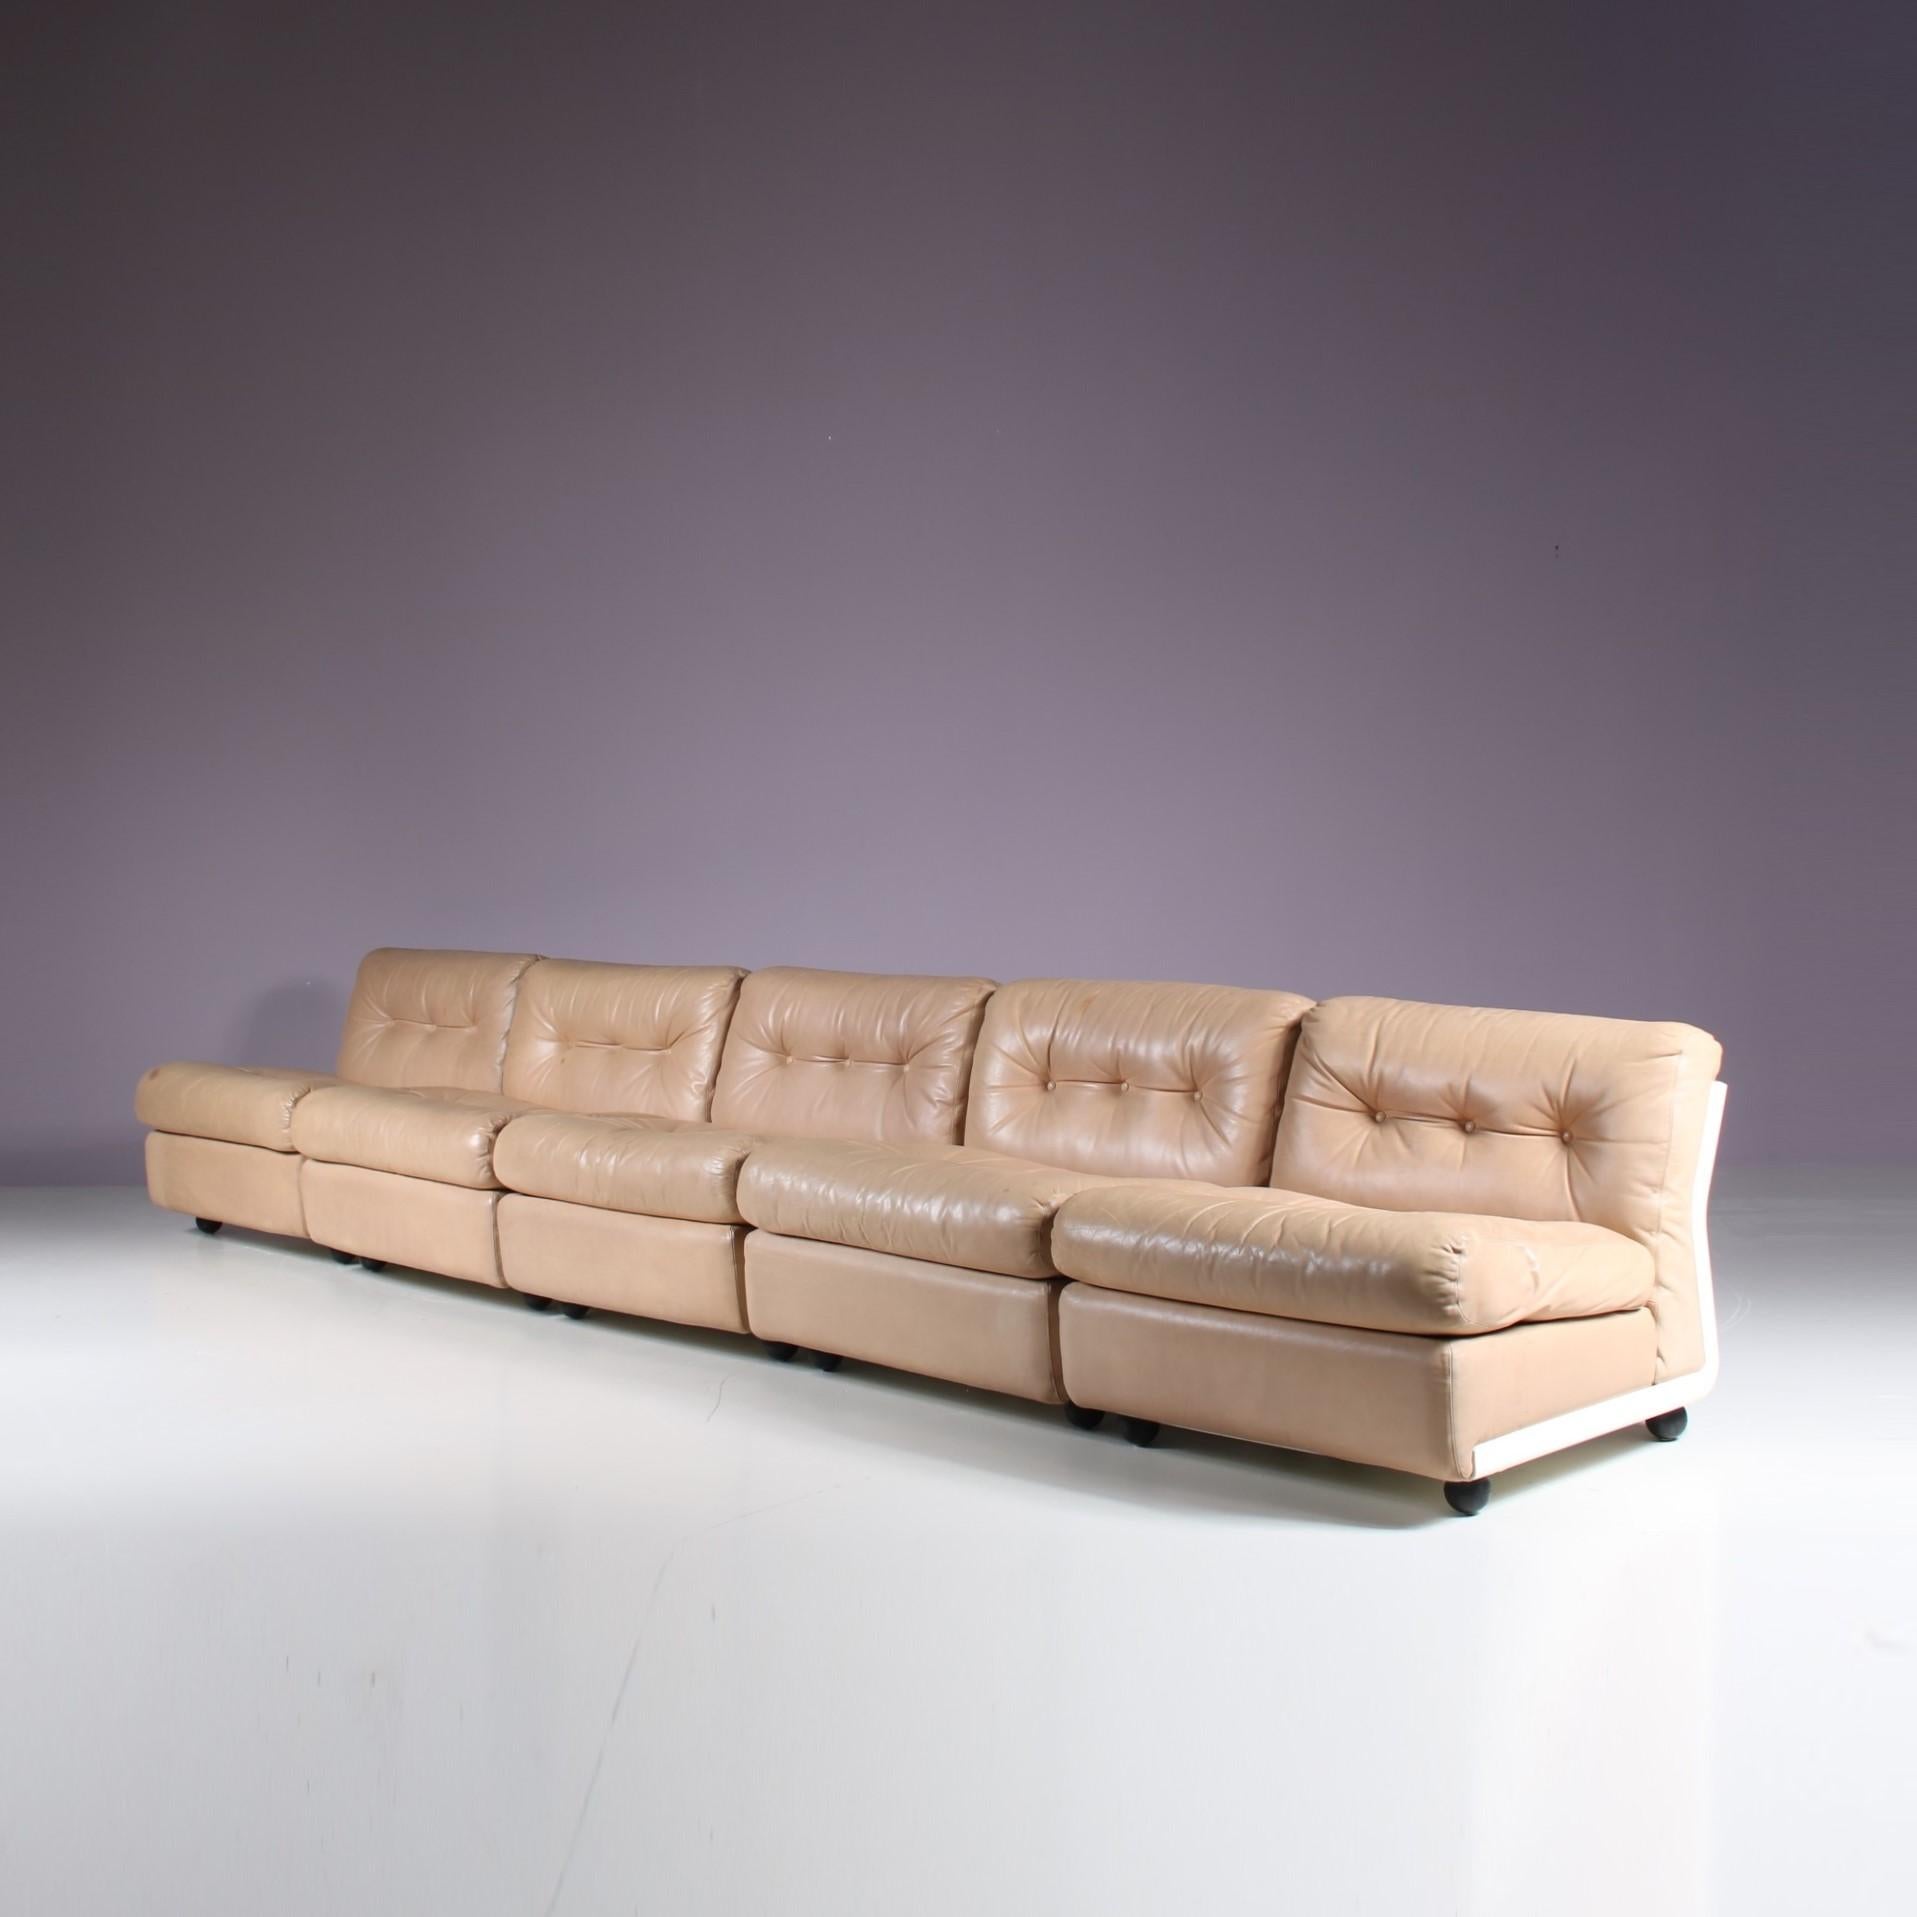 An outstanding 5 piece “Amanta” sectional sofa, designed by Mario Bellini and manufactured by C&B Italia around 1960.

This rare and beautiful piece contains five elements that can be organized to your personal preference. This makes this quality